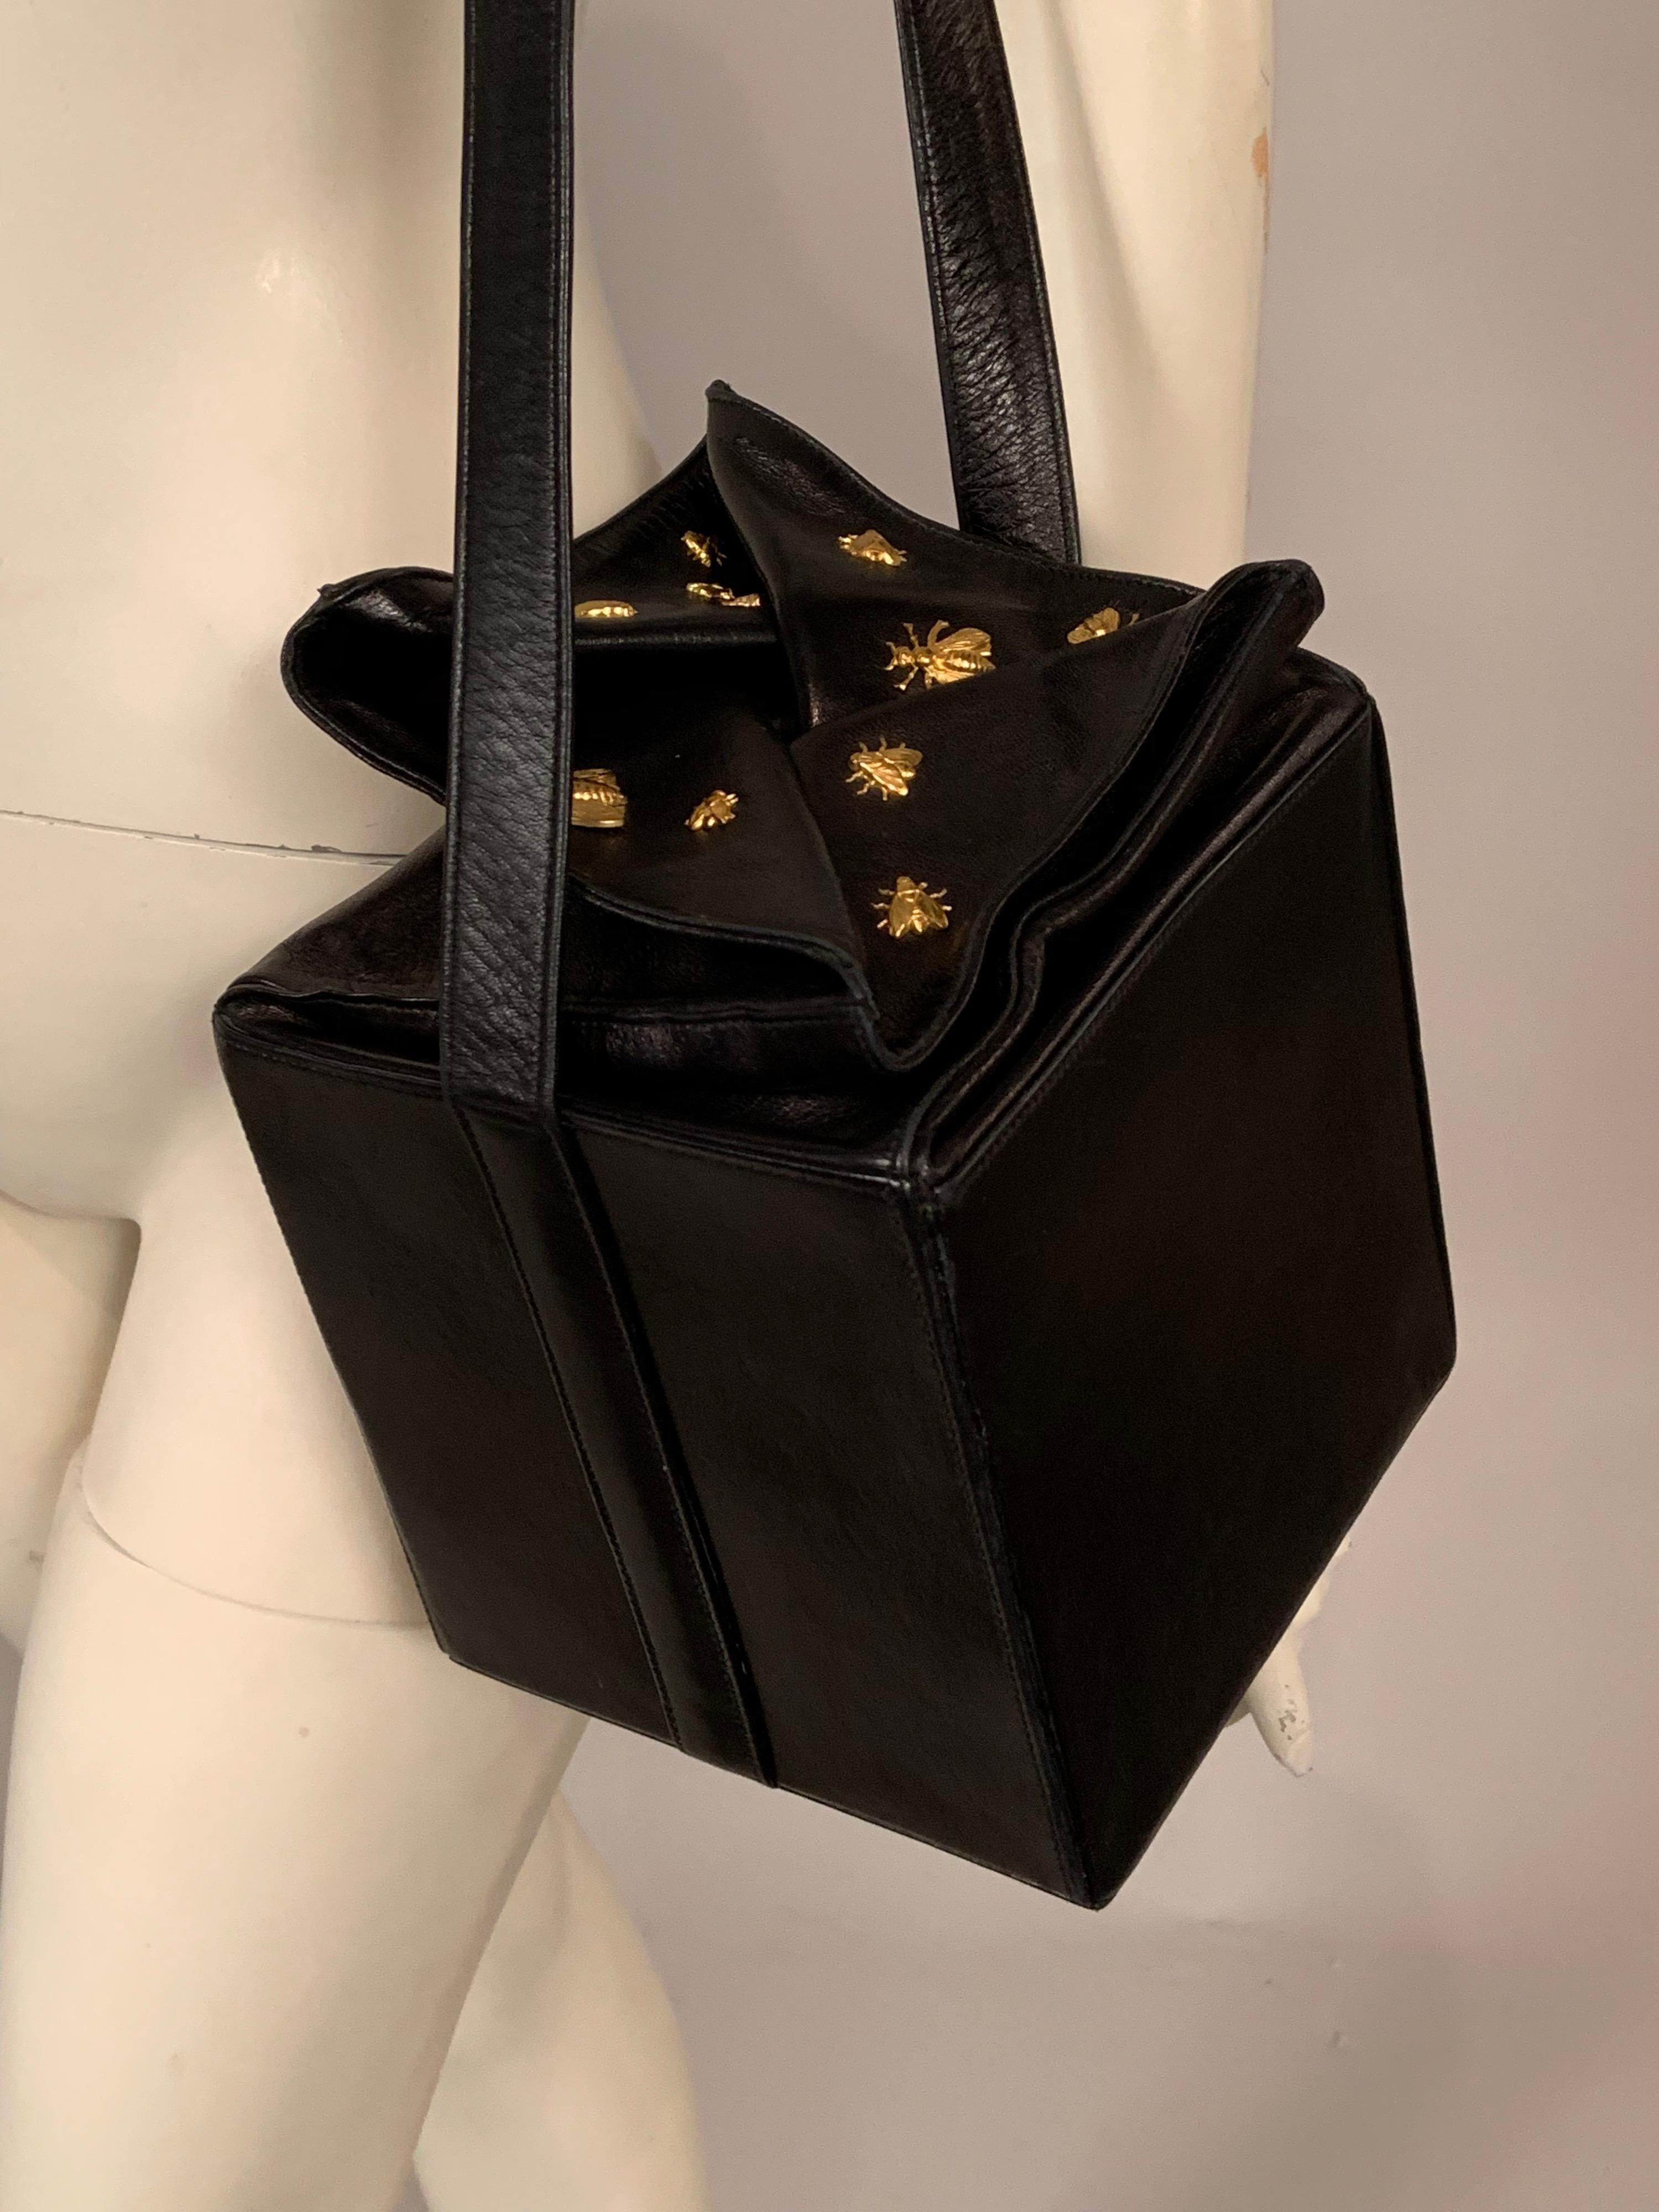 A charming and witty black lambskin leather bag, designed by Isabel Canovas has a golden bee covered folding leather top. If the bag is very full it will rise up like the top pf a beehive. The bag has long black shoulder or cross body strap, a